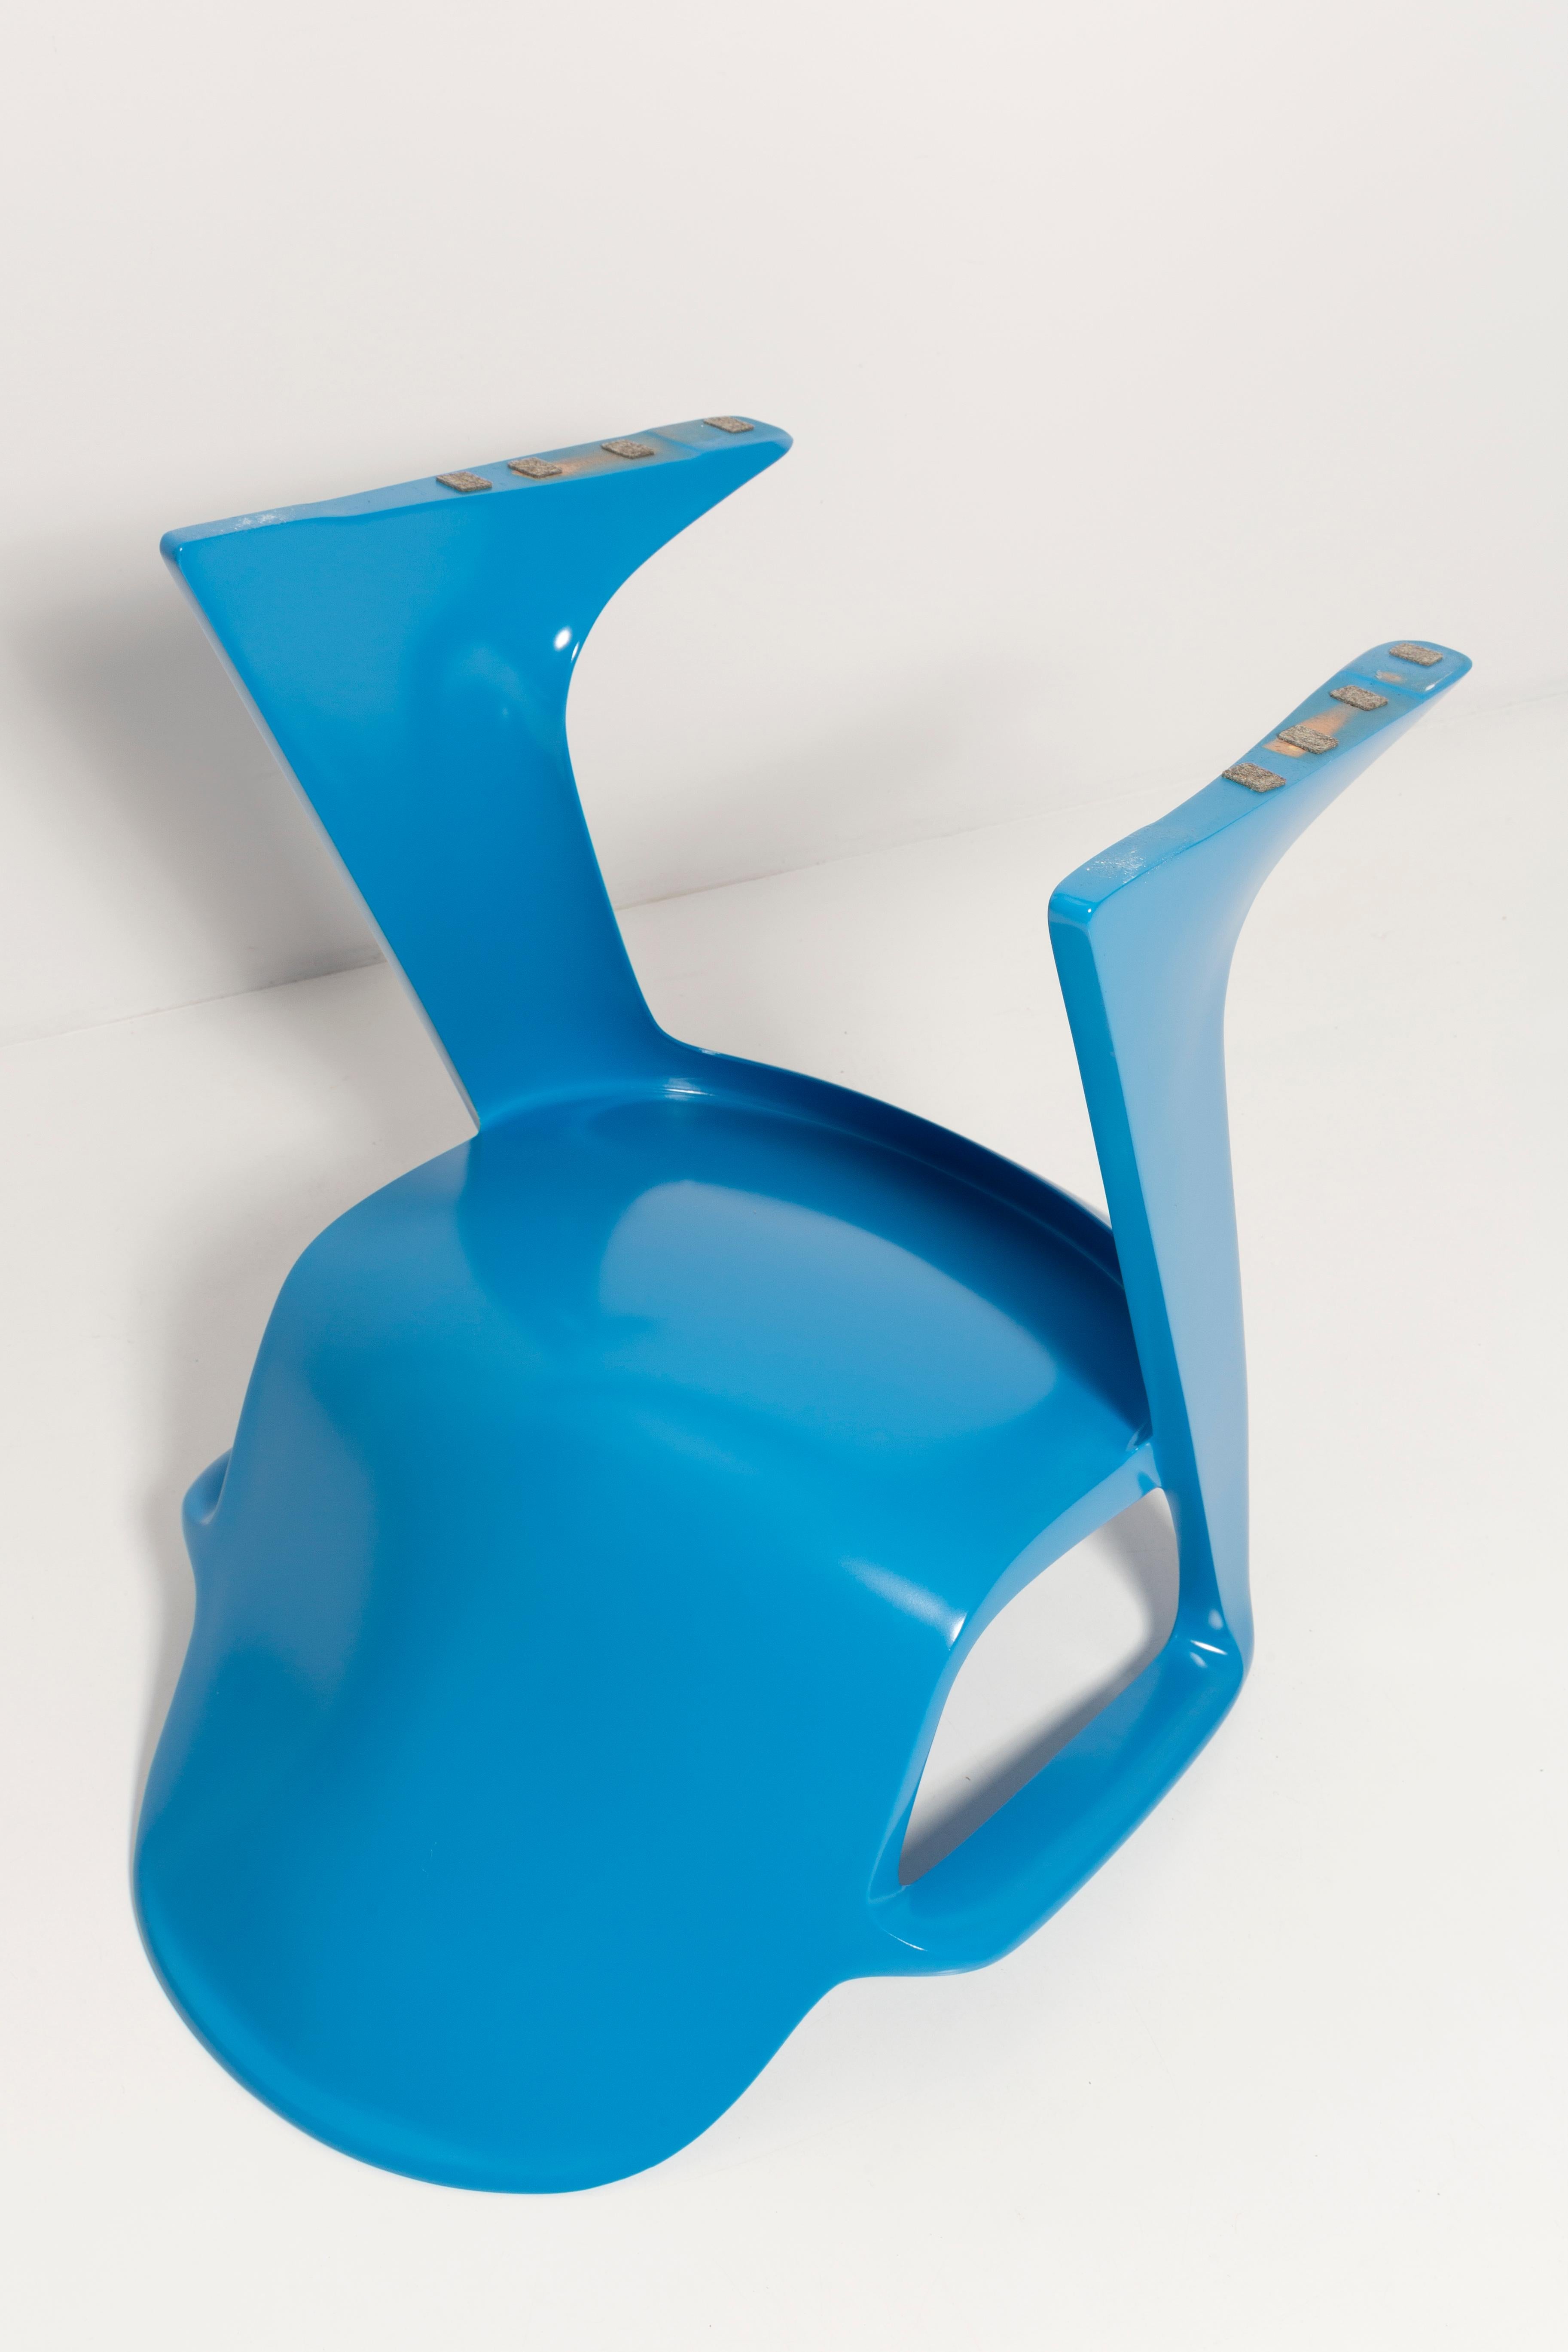 Blue Kangaroo Chair Designed by Ernst Moeckl, Germany, 1968 For Sale 5